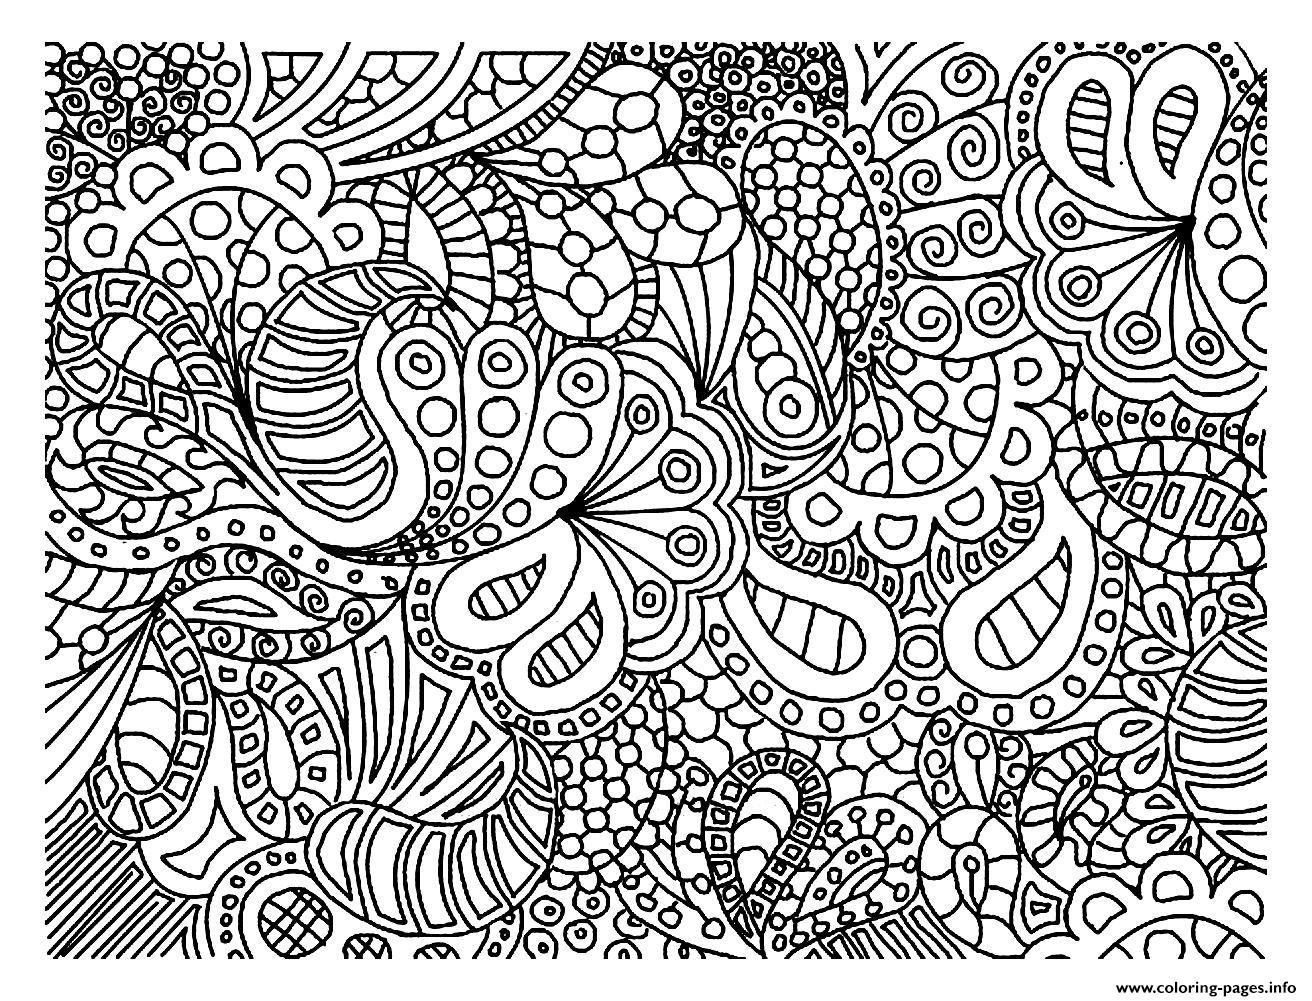 44-free-printable-doodle-art-coloring-pages-pictures-colorist